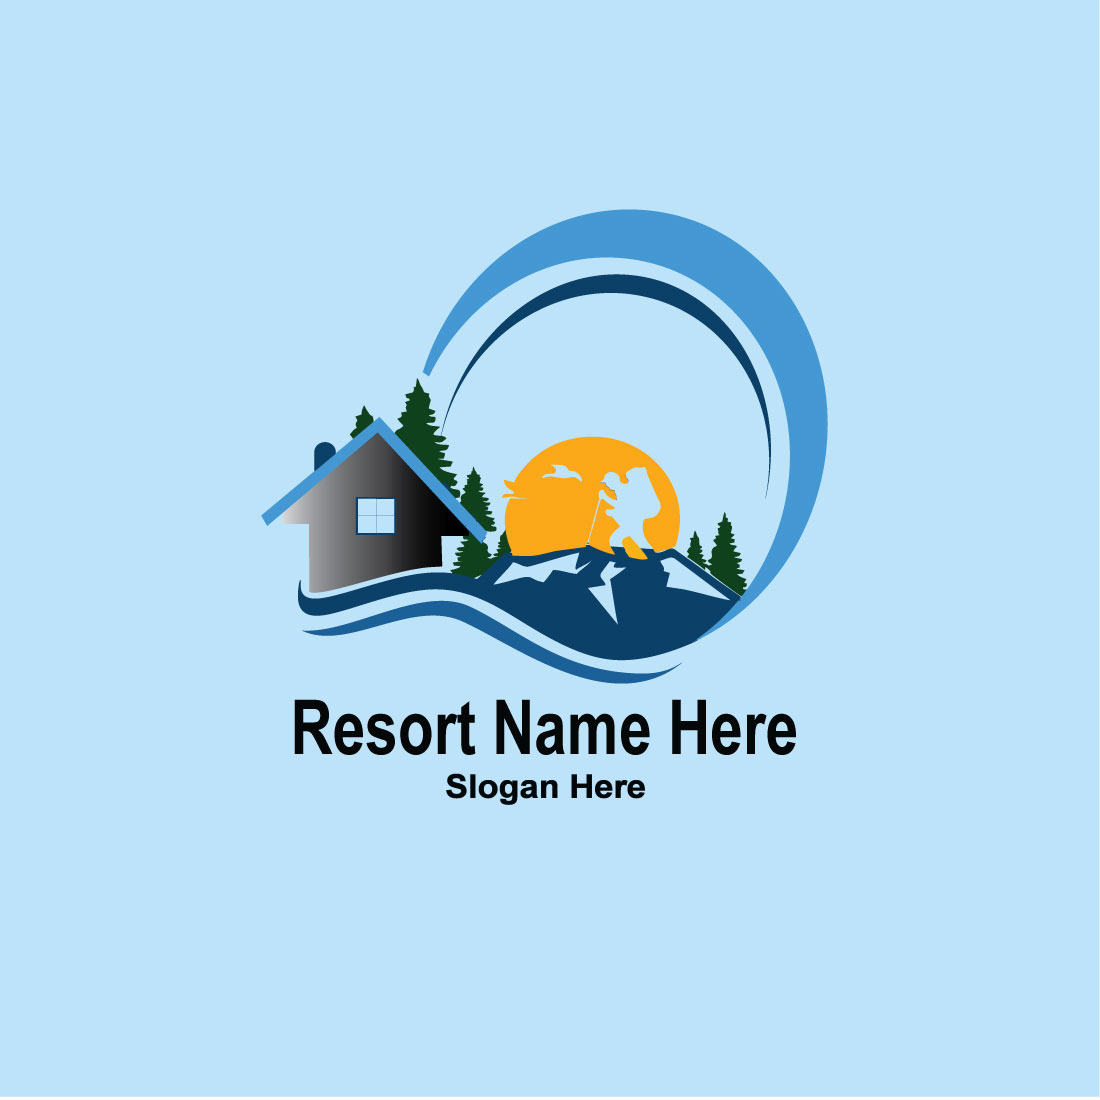 Shangri - La Hotels and Resort logo redesign. by Arman Graphic Studio on  Dribbble